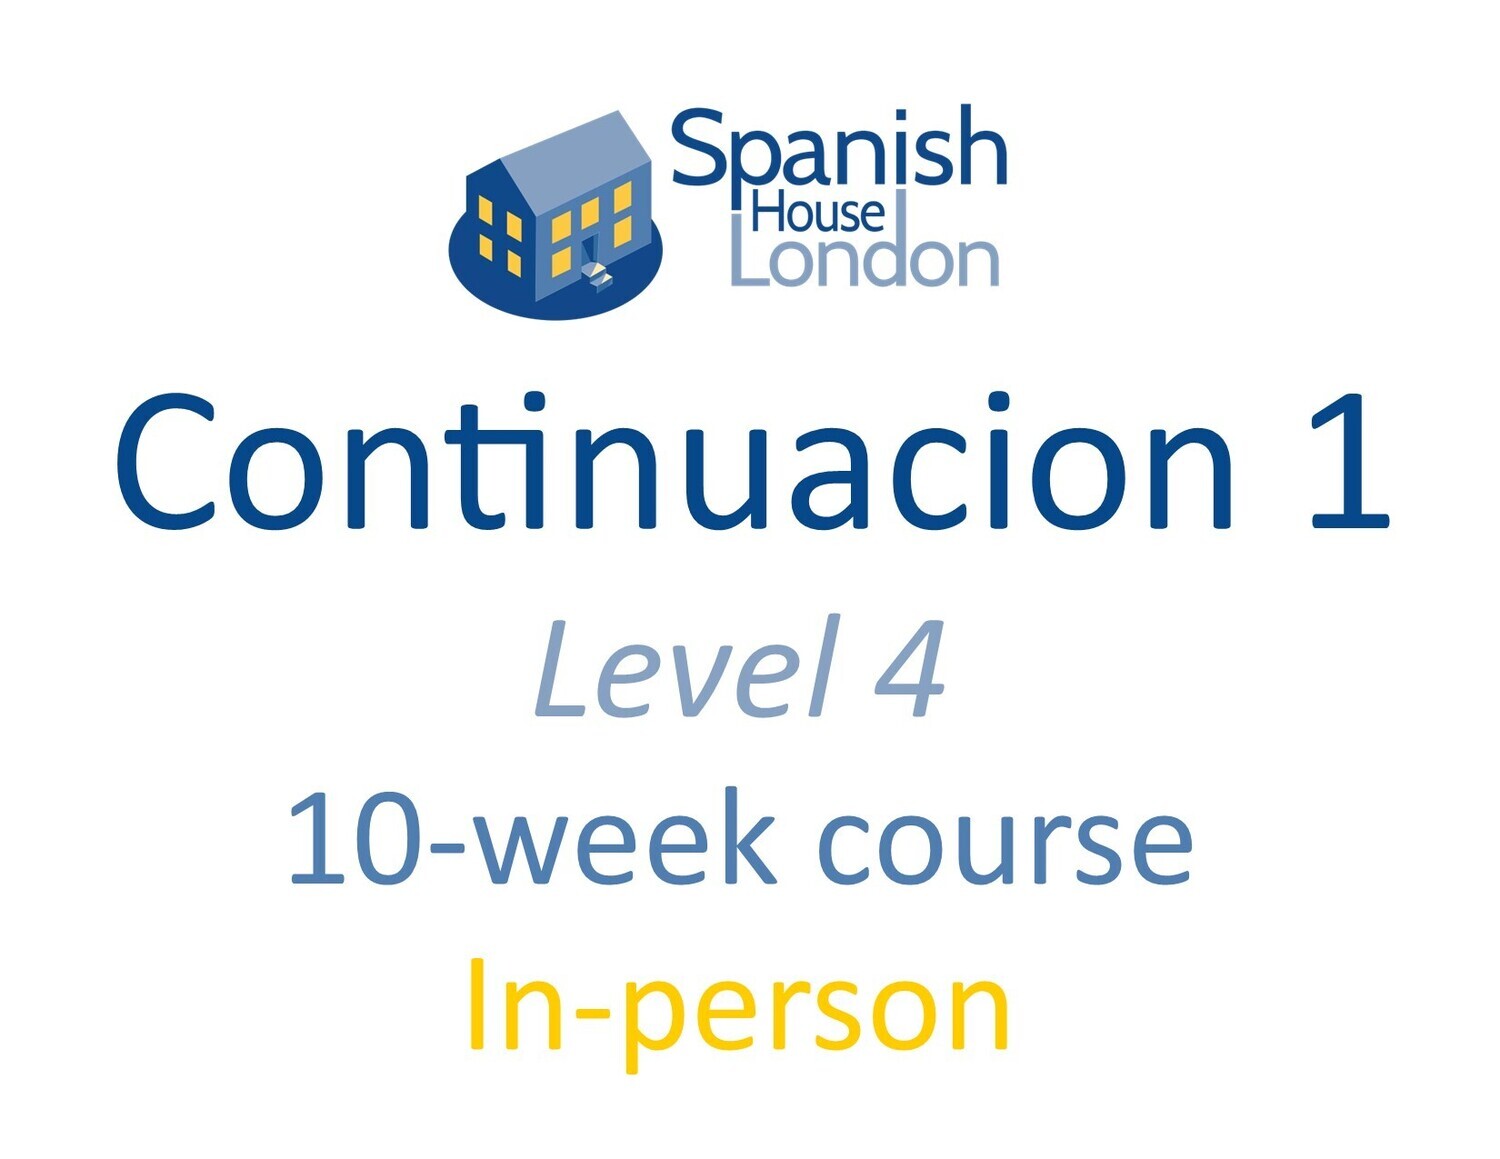 Continuacion 1 Course starting on 24th May at 6pm in Clapham North